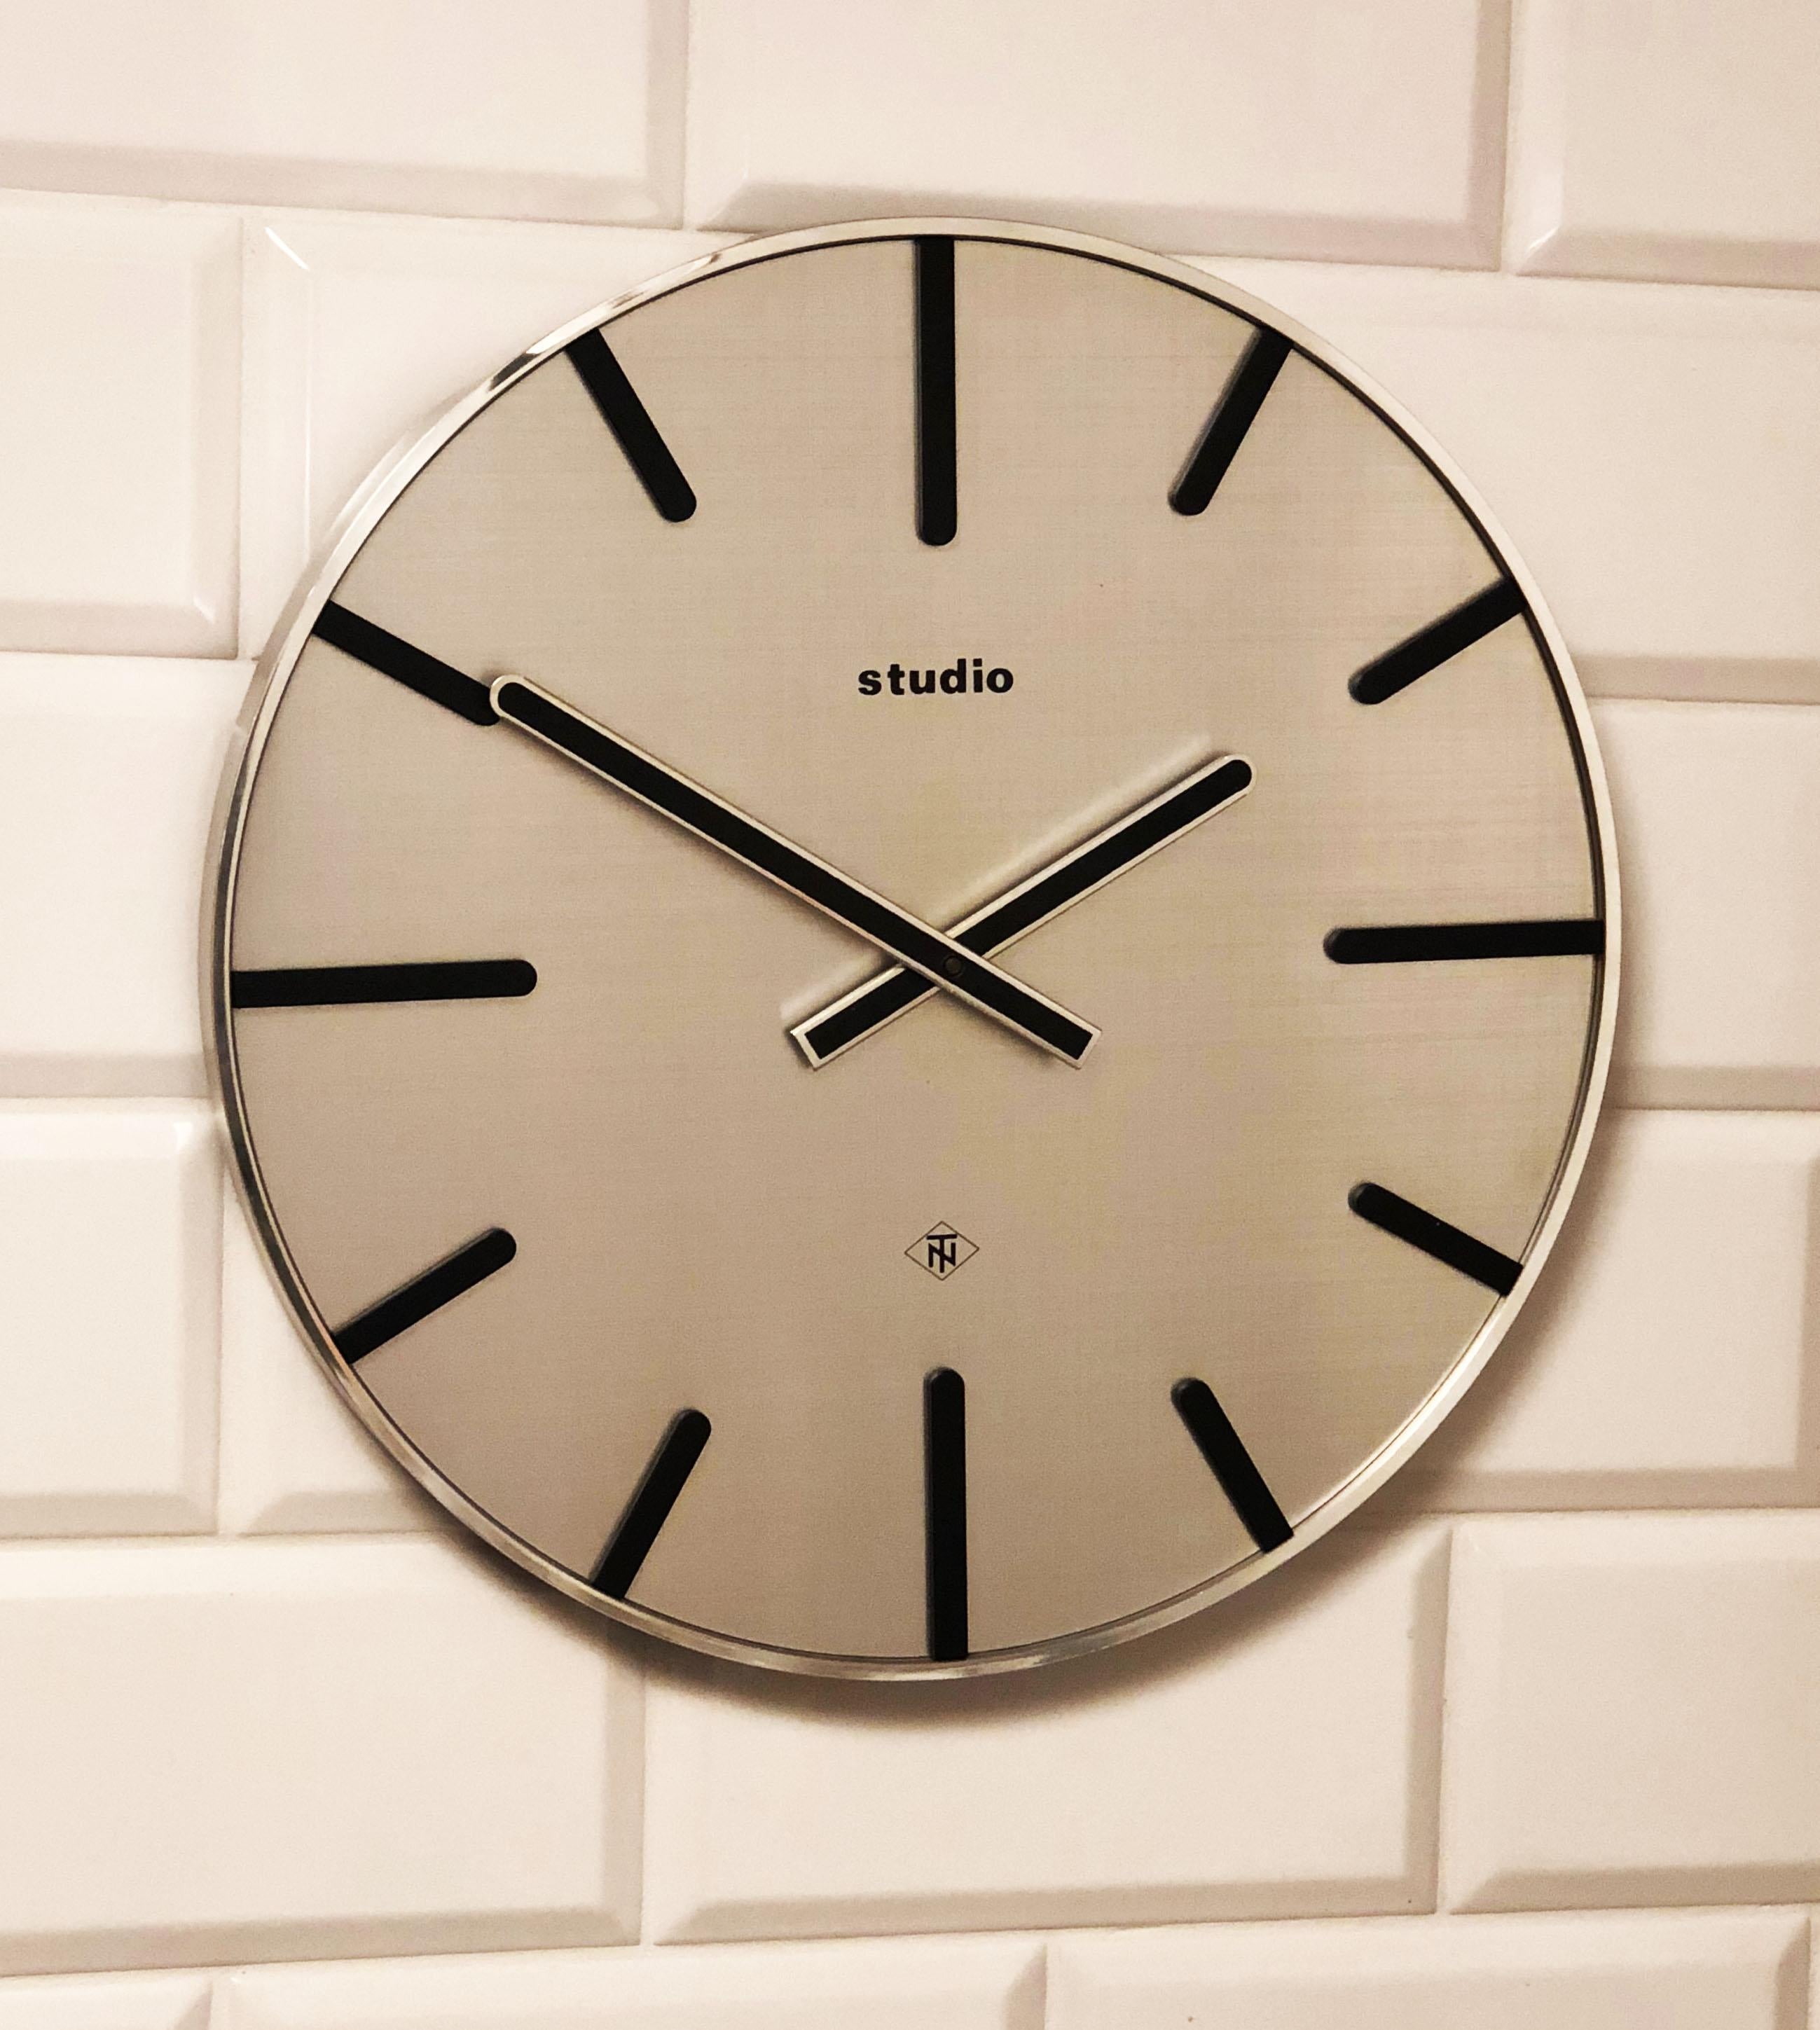 German TN Telenorma Studio Electric Wall Clock In Excellent Condition For Sale In Vienna, AT